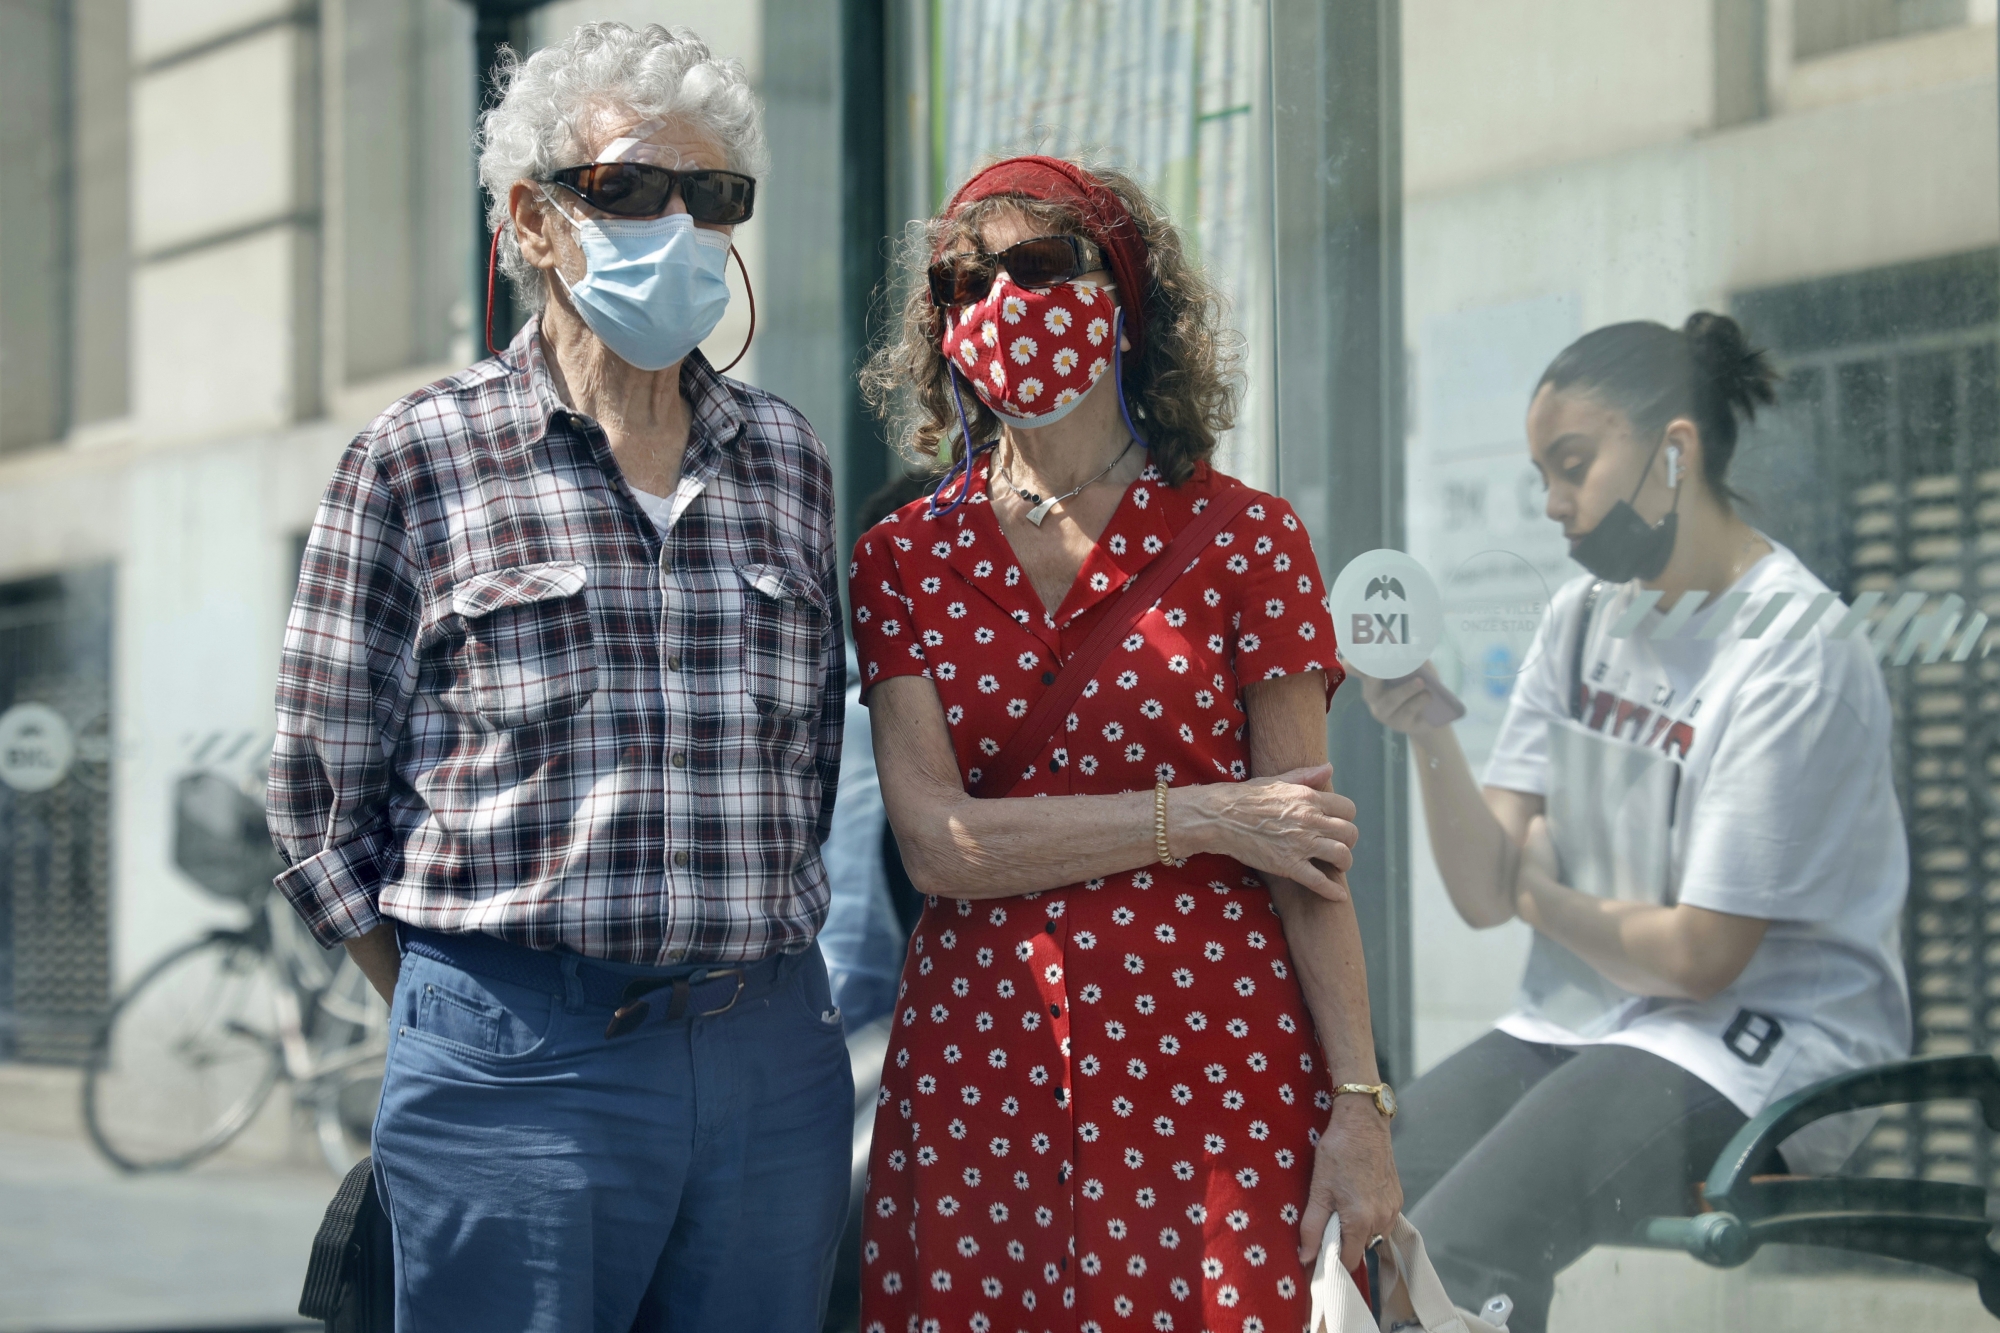 Two people wear protective face masks as they stand near a bus stop in Brussels, Wednesday, June 9, 2021. Belgians ventured out more widely Wednesday as the government lifted a raft of coronavirus restrictions. While the obligatory outdoor mask requirement for Brussels has been lifted some people were still cautious. (AP Photo/Olivier Matthys)